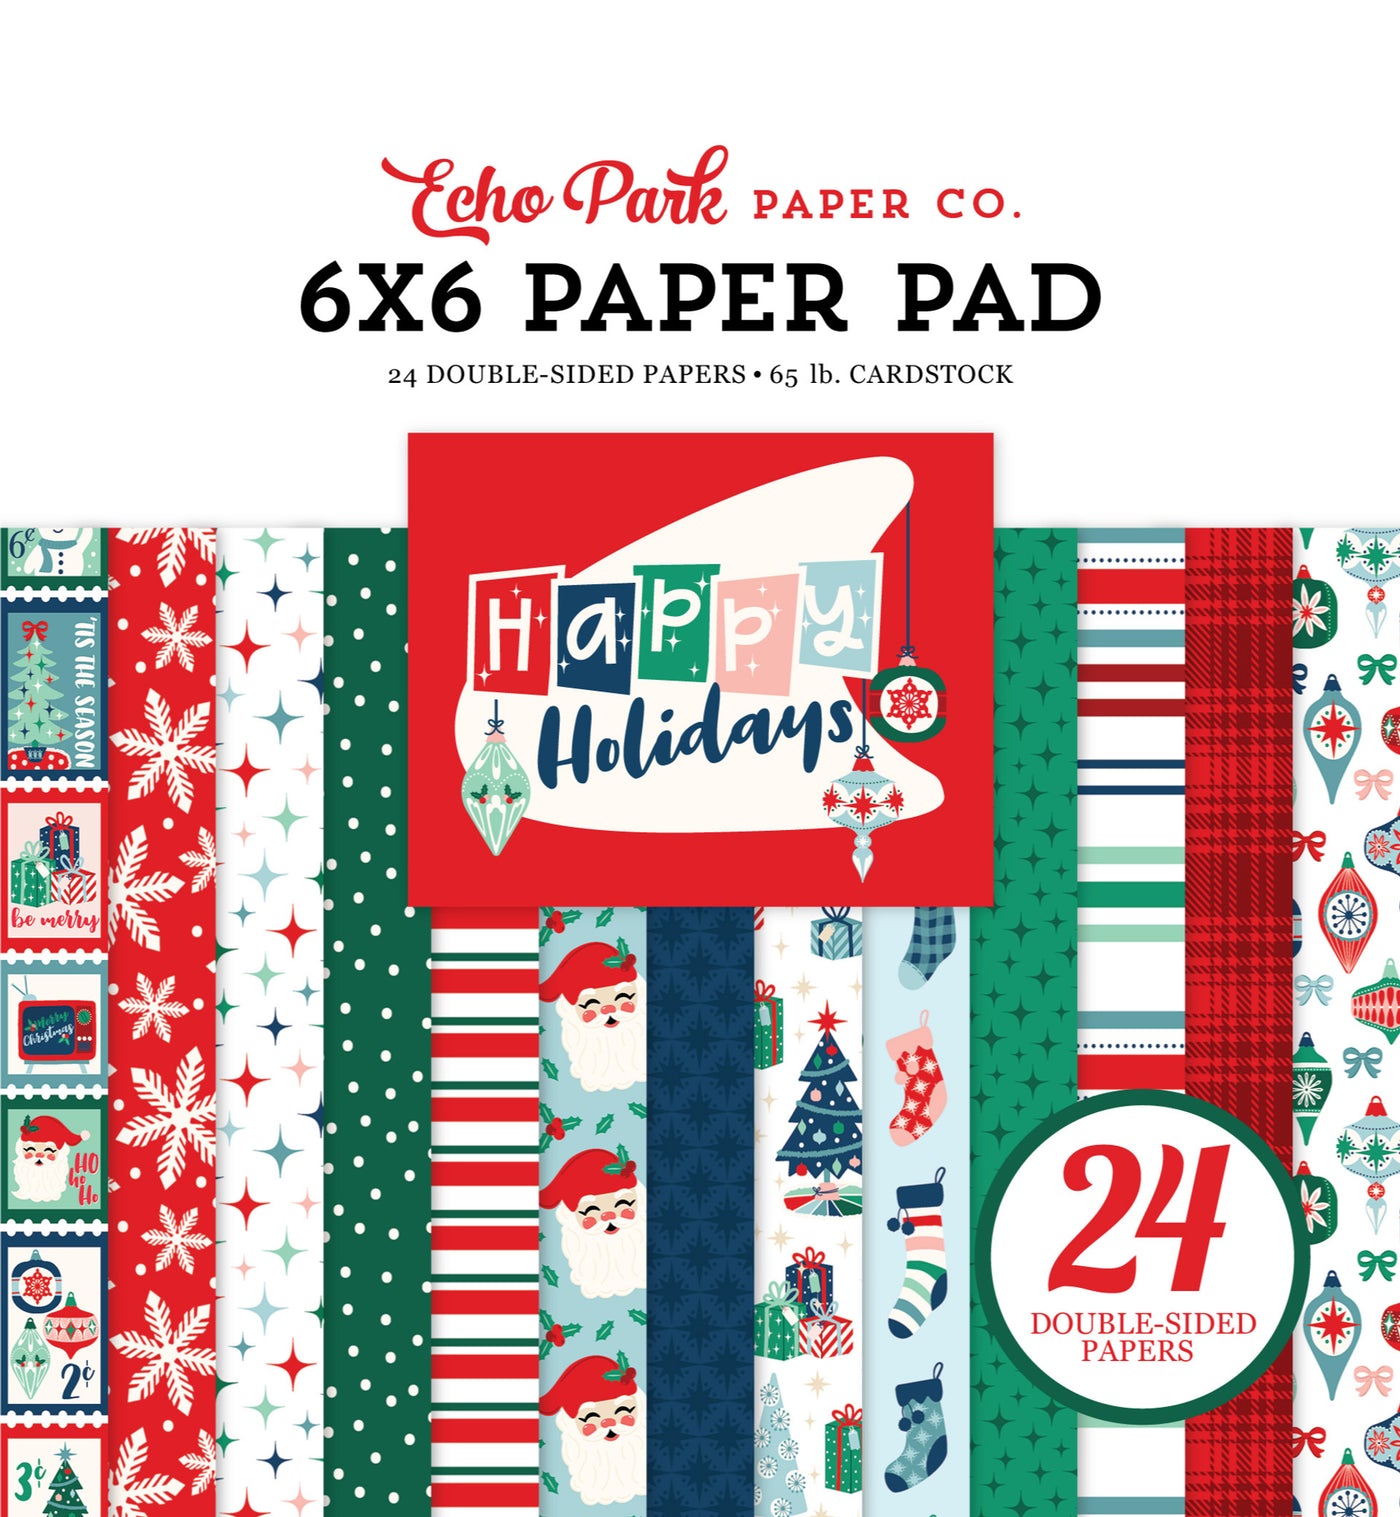 6x6 pad with 24 double-sided sheets; scaled-down images are great for card making and similar crafts; pad has brightly colored Christmas theme!